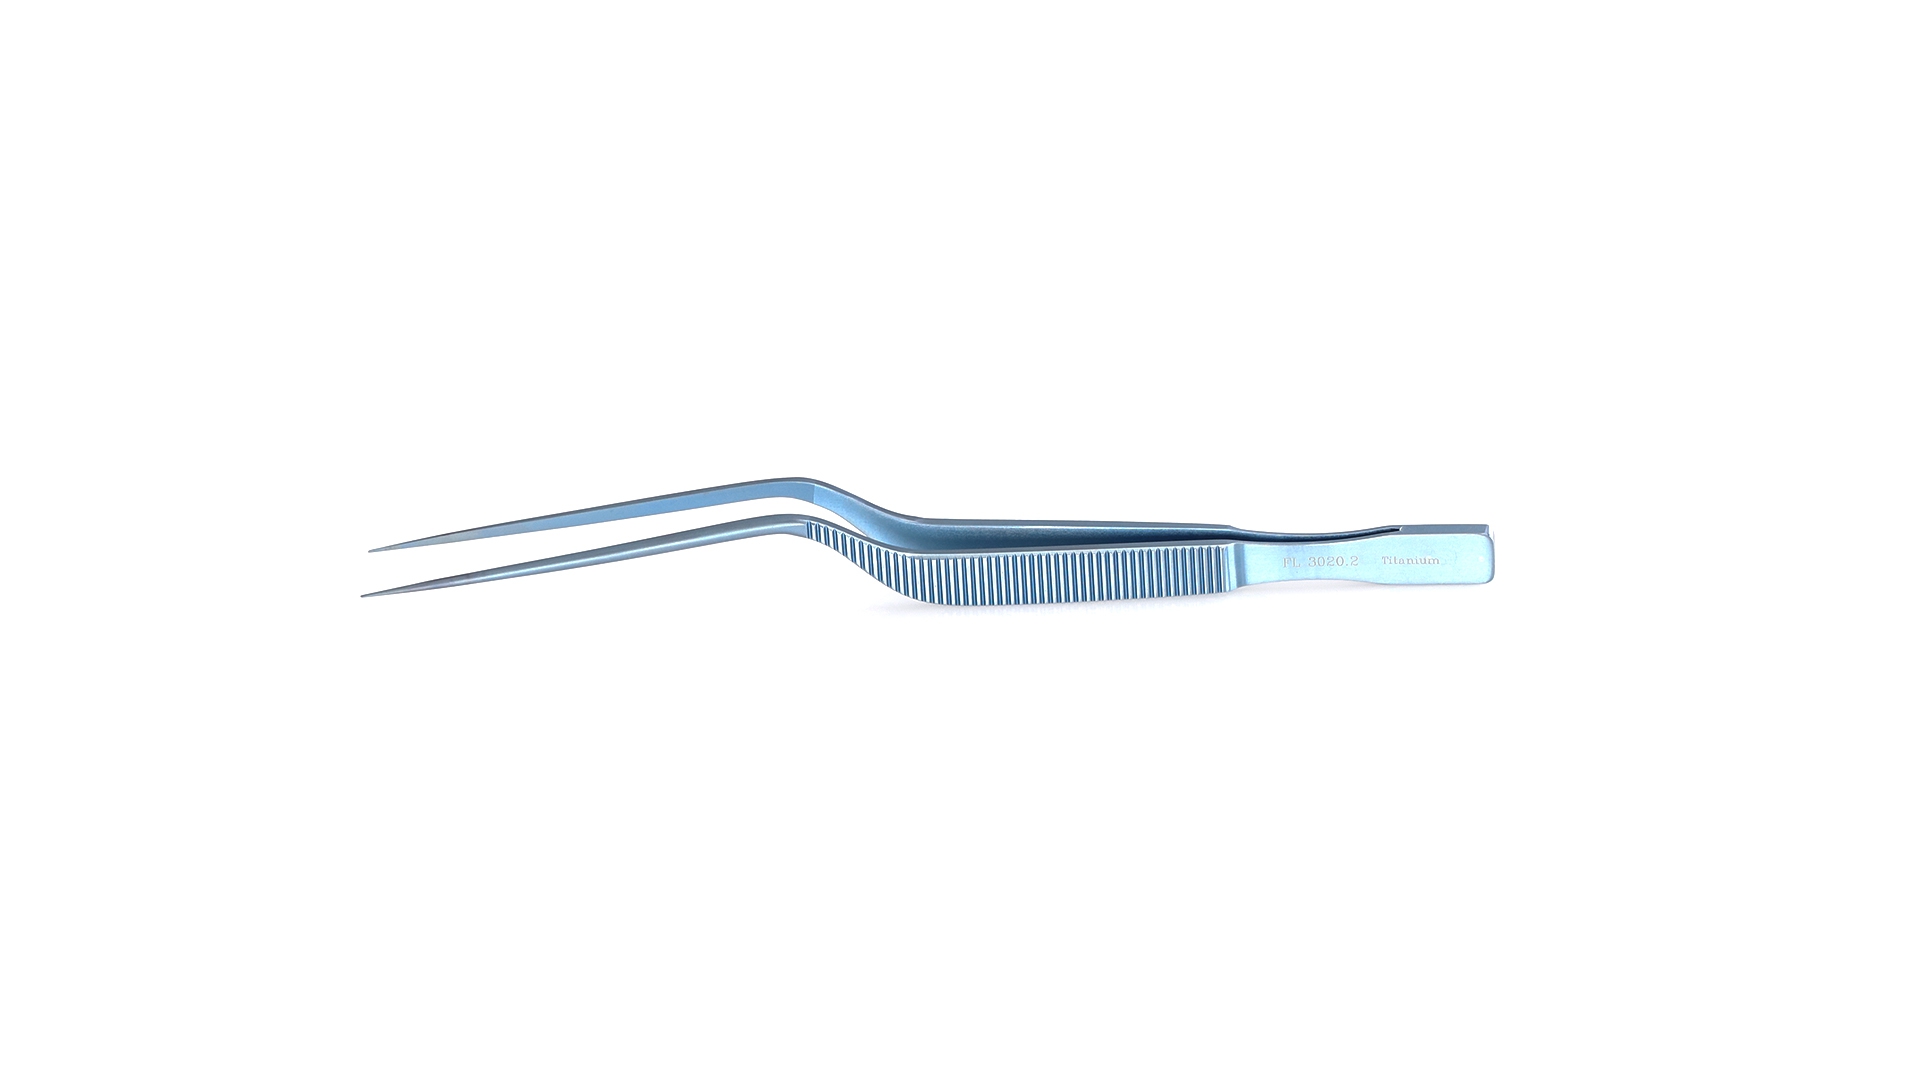 Micro Forceps - Straight 0.5mm tips